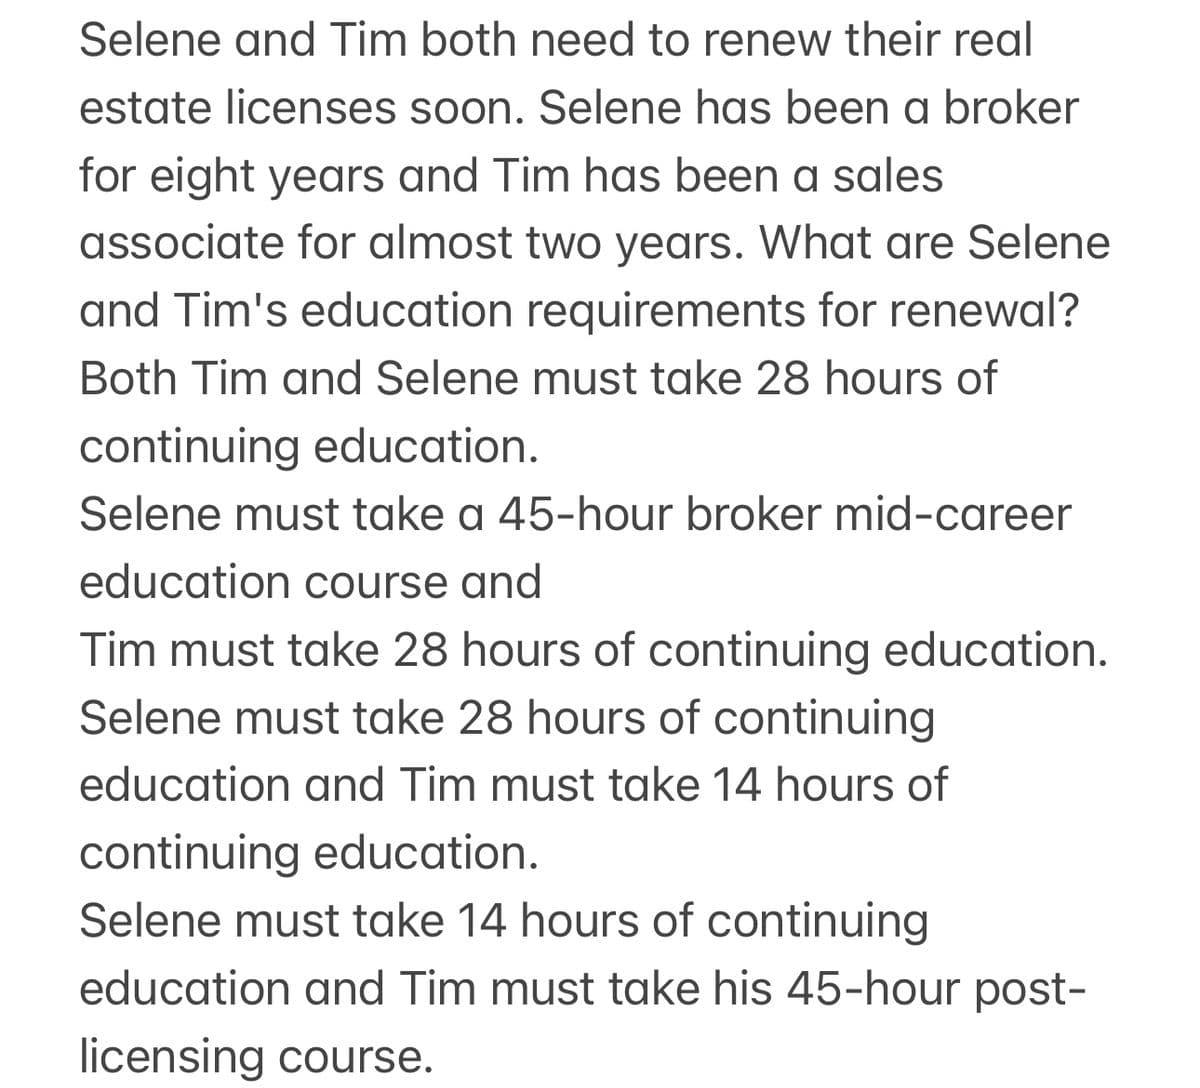 Selene and Tim both need to renew their real
estate licenses soon. Selene has been a broker
for eight years and Tim has been a sales
associate for almost two years. What are Selene
and Tim's education requirements for renewal?
Both Tim and Selene must take 28 hours of
continuing education.
Selene must take a 45-hour broker mid-career
education course and
Tim must take 28 hours of continuing education.
Selene must take 28 hours of continuing
education and Tim must take 14 hours of
continuing education.
Selene must take 14 hours of continuing
education and Tim must take his 45-hour post-
licensing course.